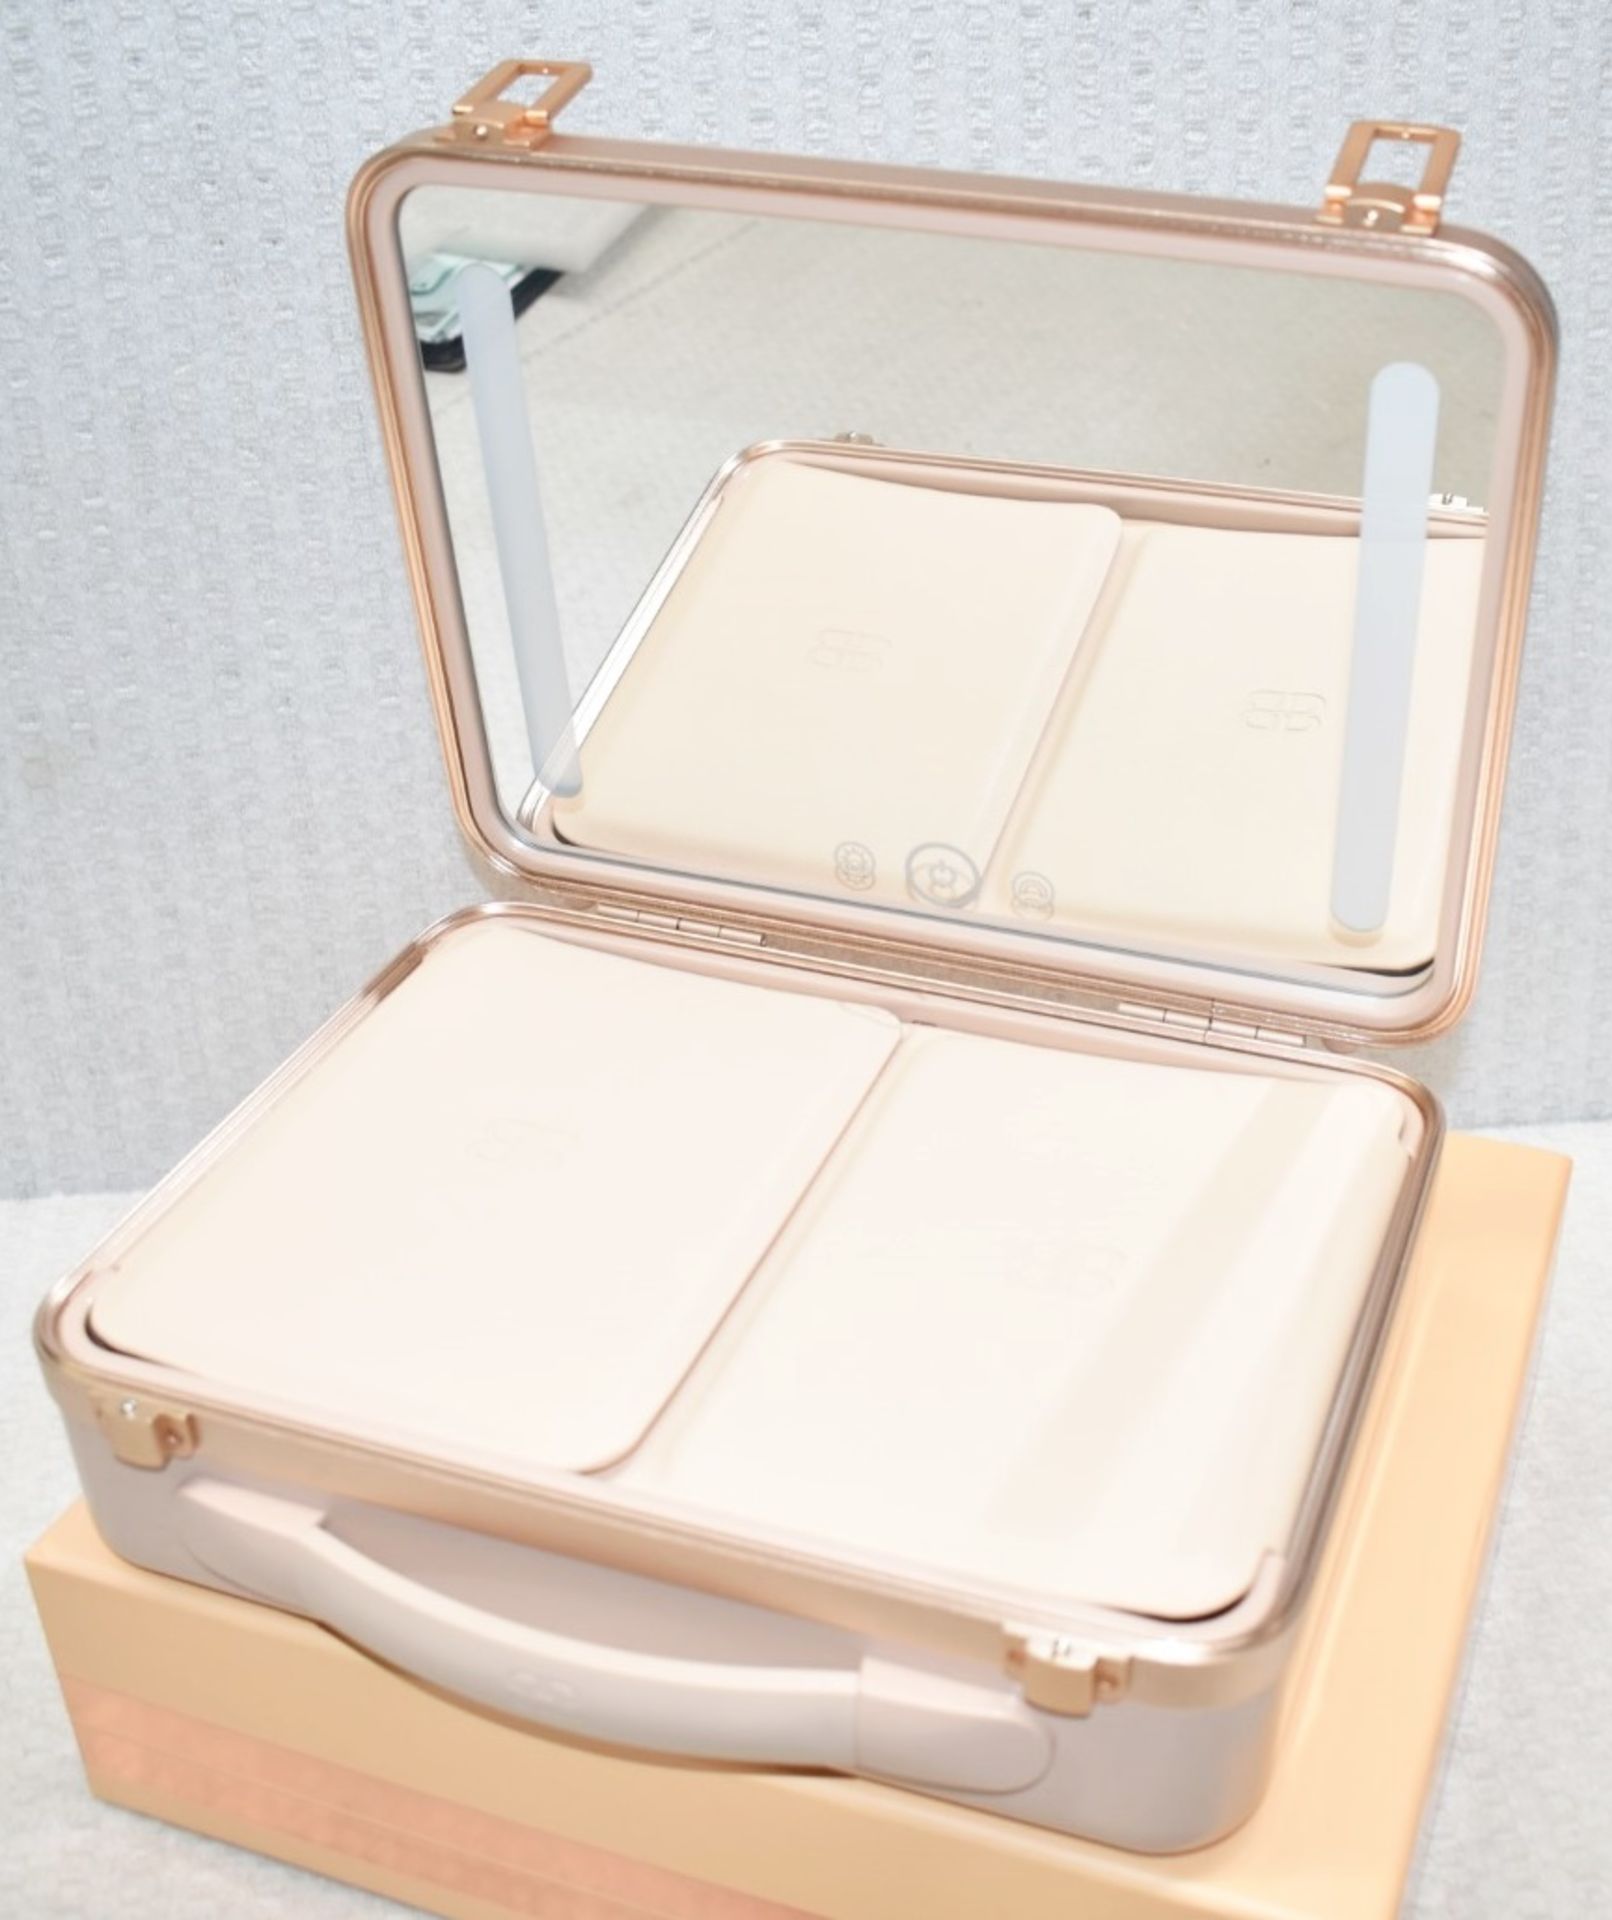 1 x BEAUTIFECT 'Beautifect Box' Make-Up Carry Case With Built-in Mirror - RRP £279.00 - Image 9 of 13